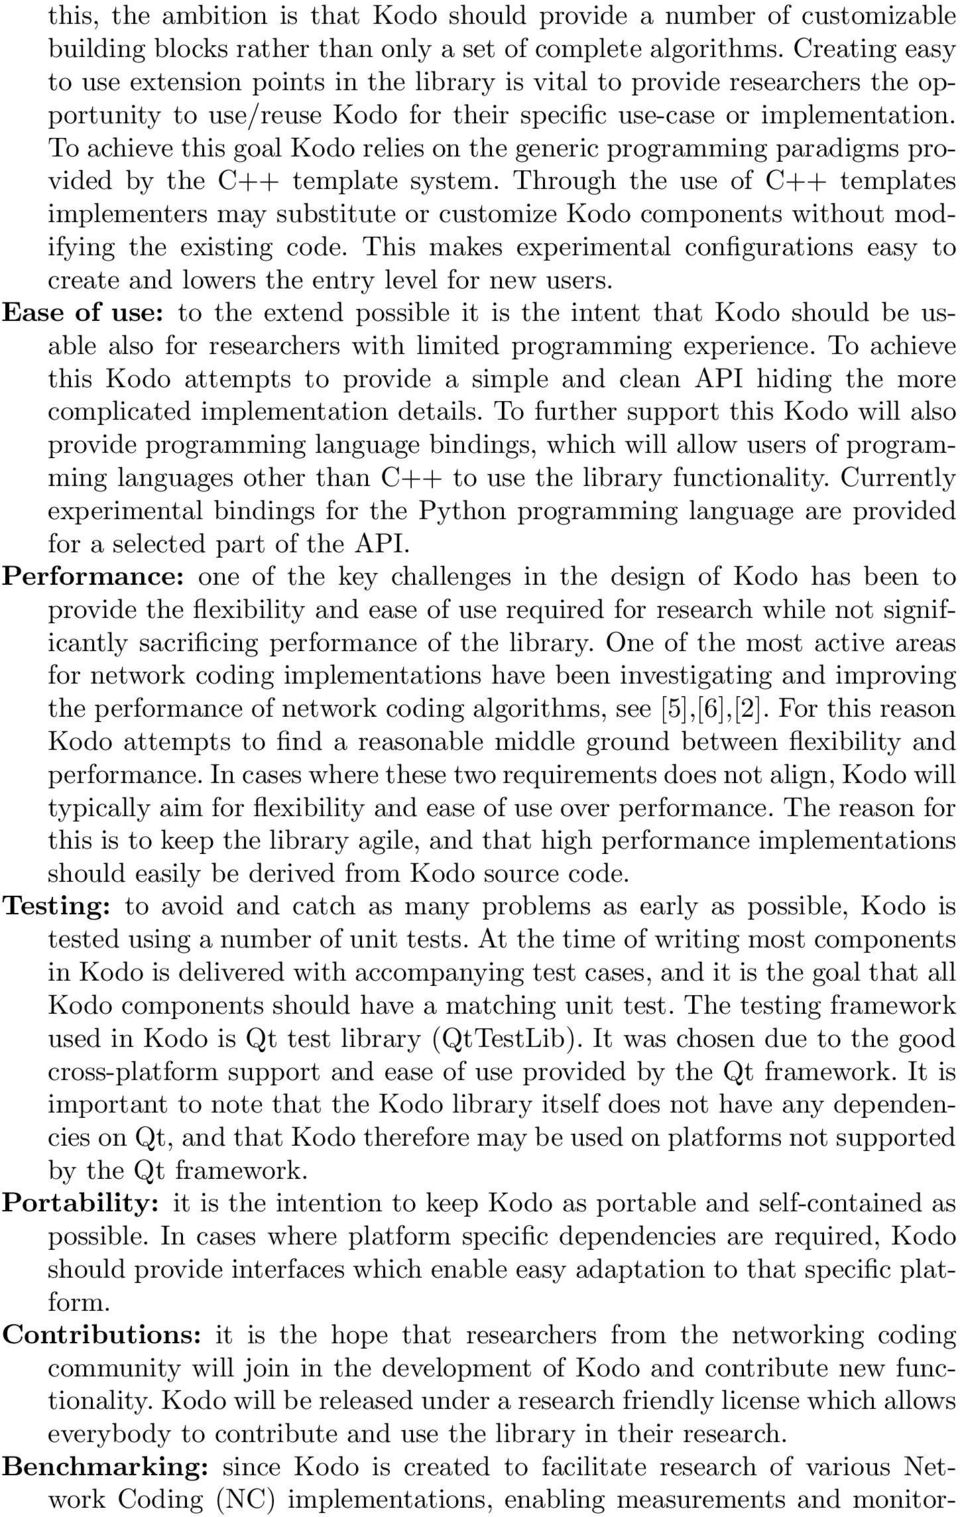 To achieve this goal Kodo relies on the generic programming paradigms provided by the C++ template system.